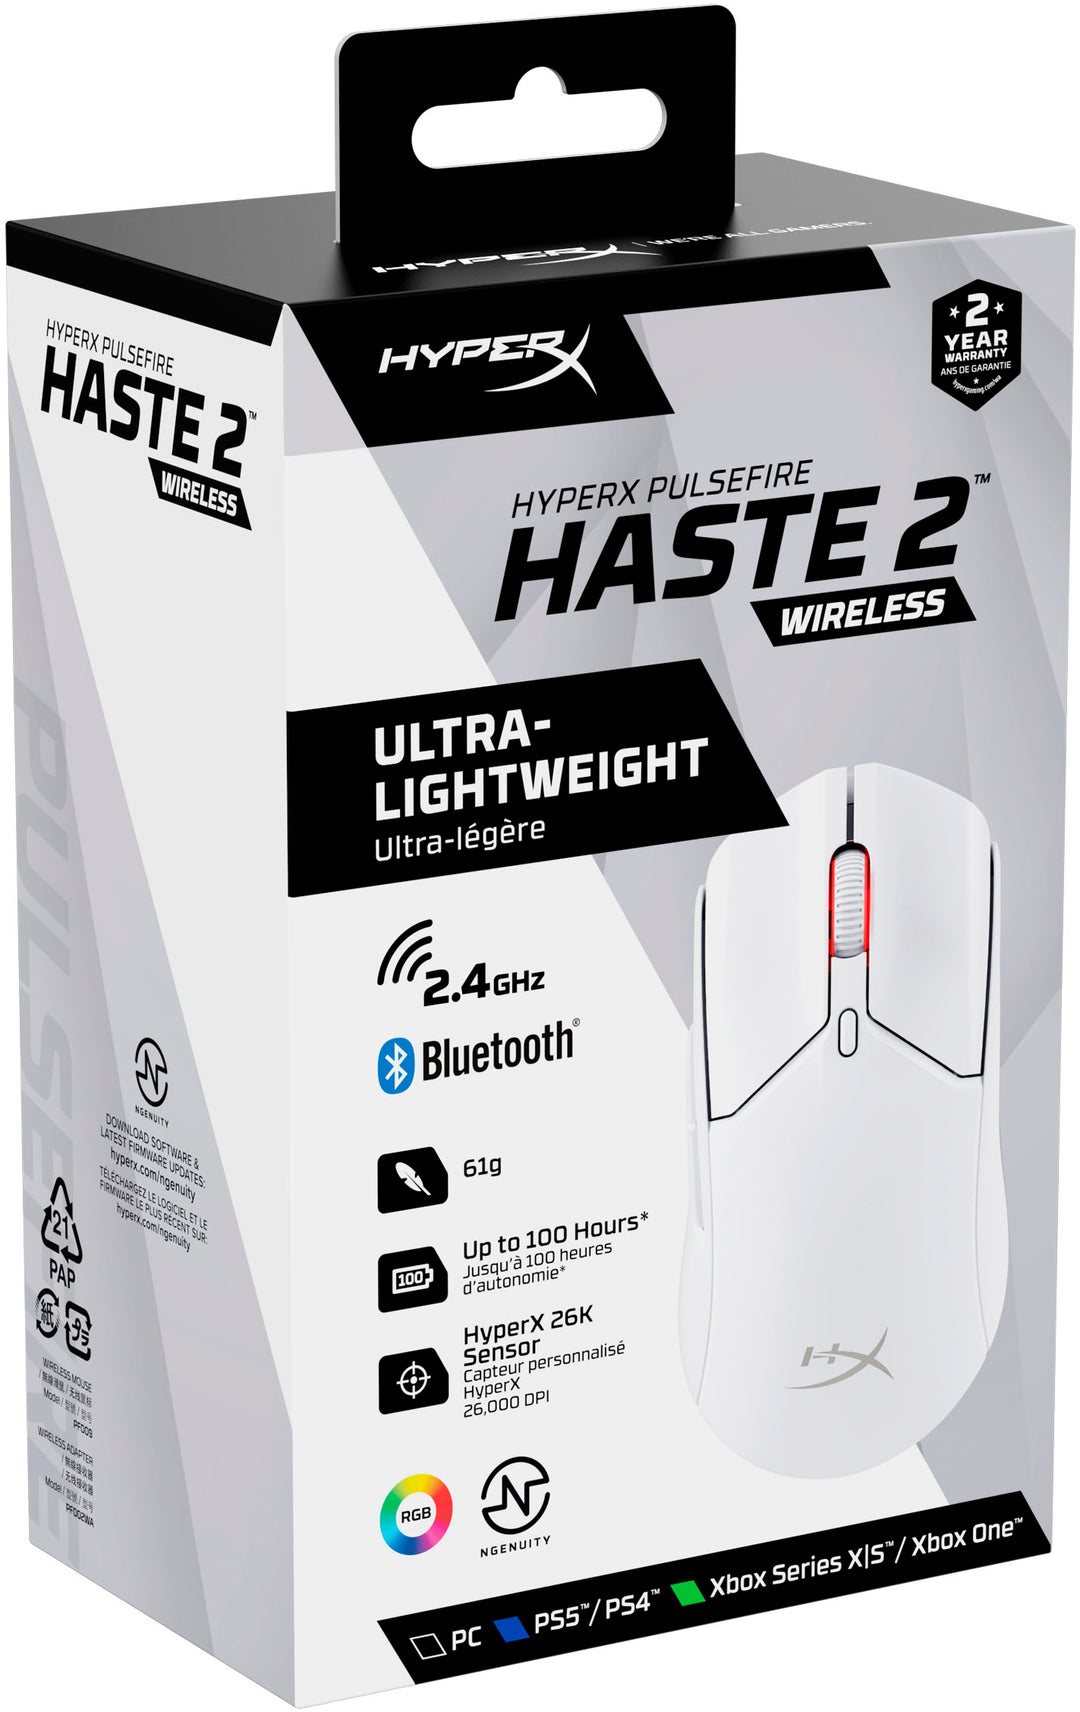 HyperX - Pulsefire Haste 2 Lightweight Wireless Optical Gaming Mouse with RGB Lighting - White_4